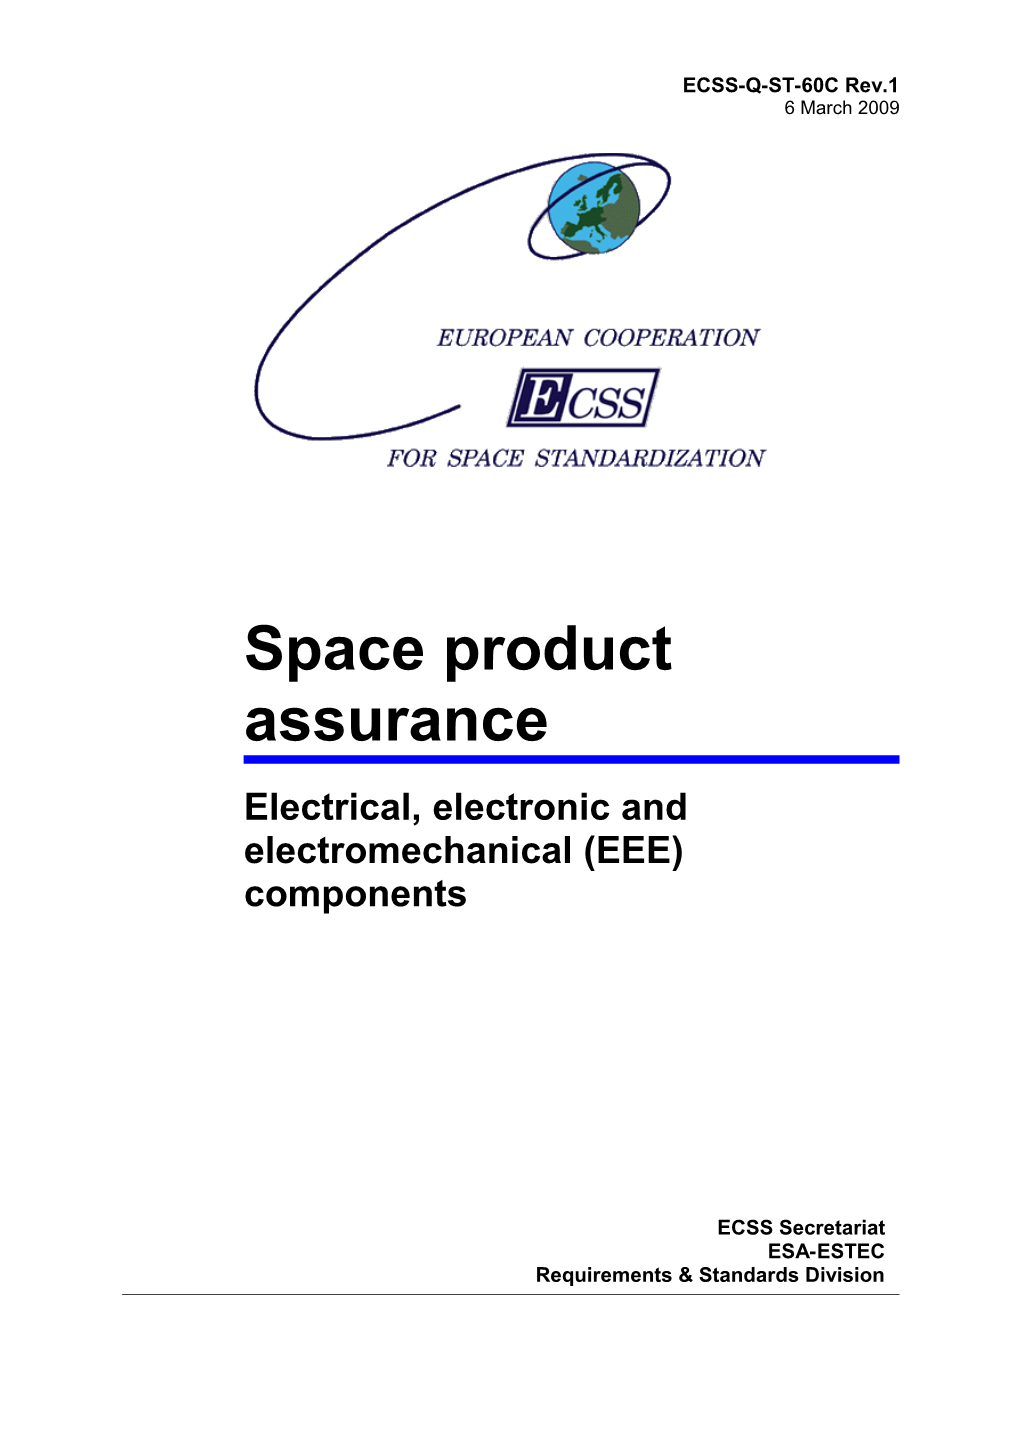 Electrical, Electronic and Electromechanical (EEE) Components